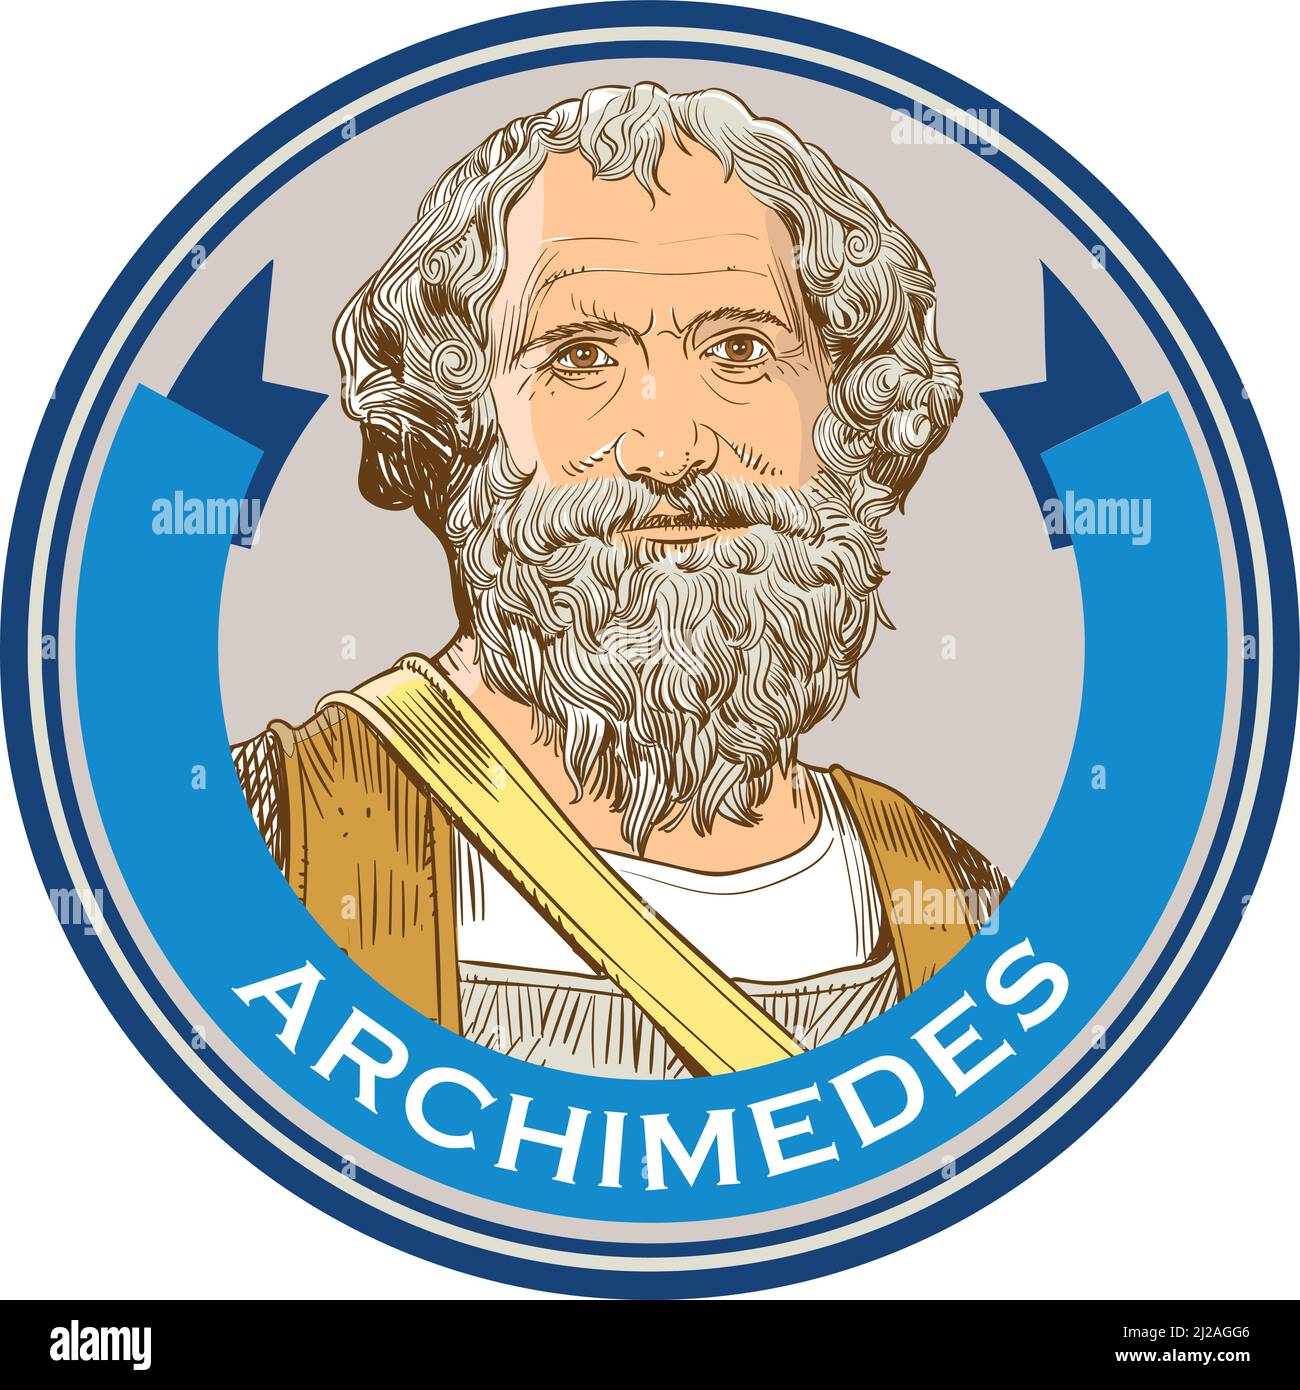 Archimedes portrait in line art illustration. He was a Greek mathematician, philosopher and inventor. Stock Vector